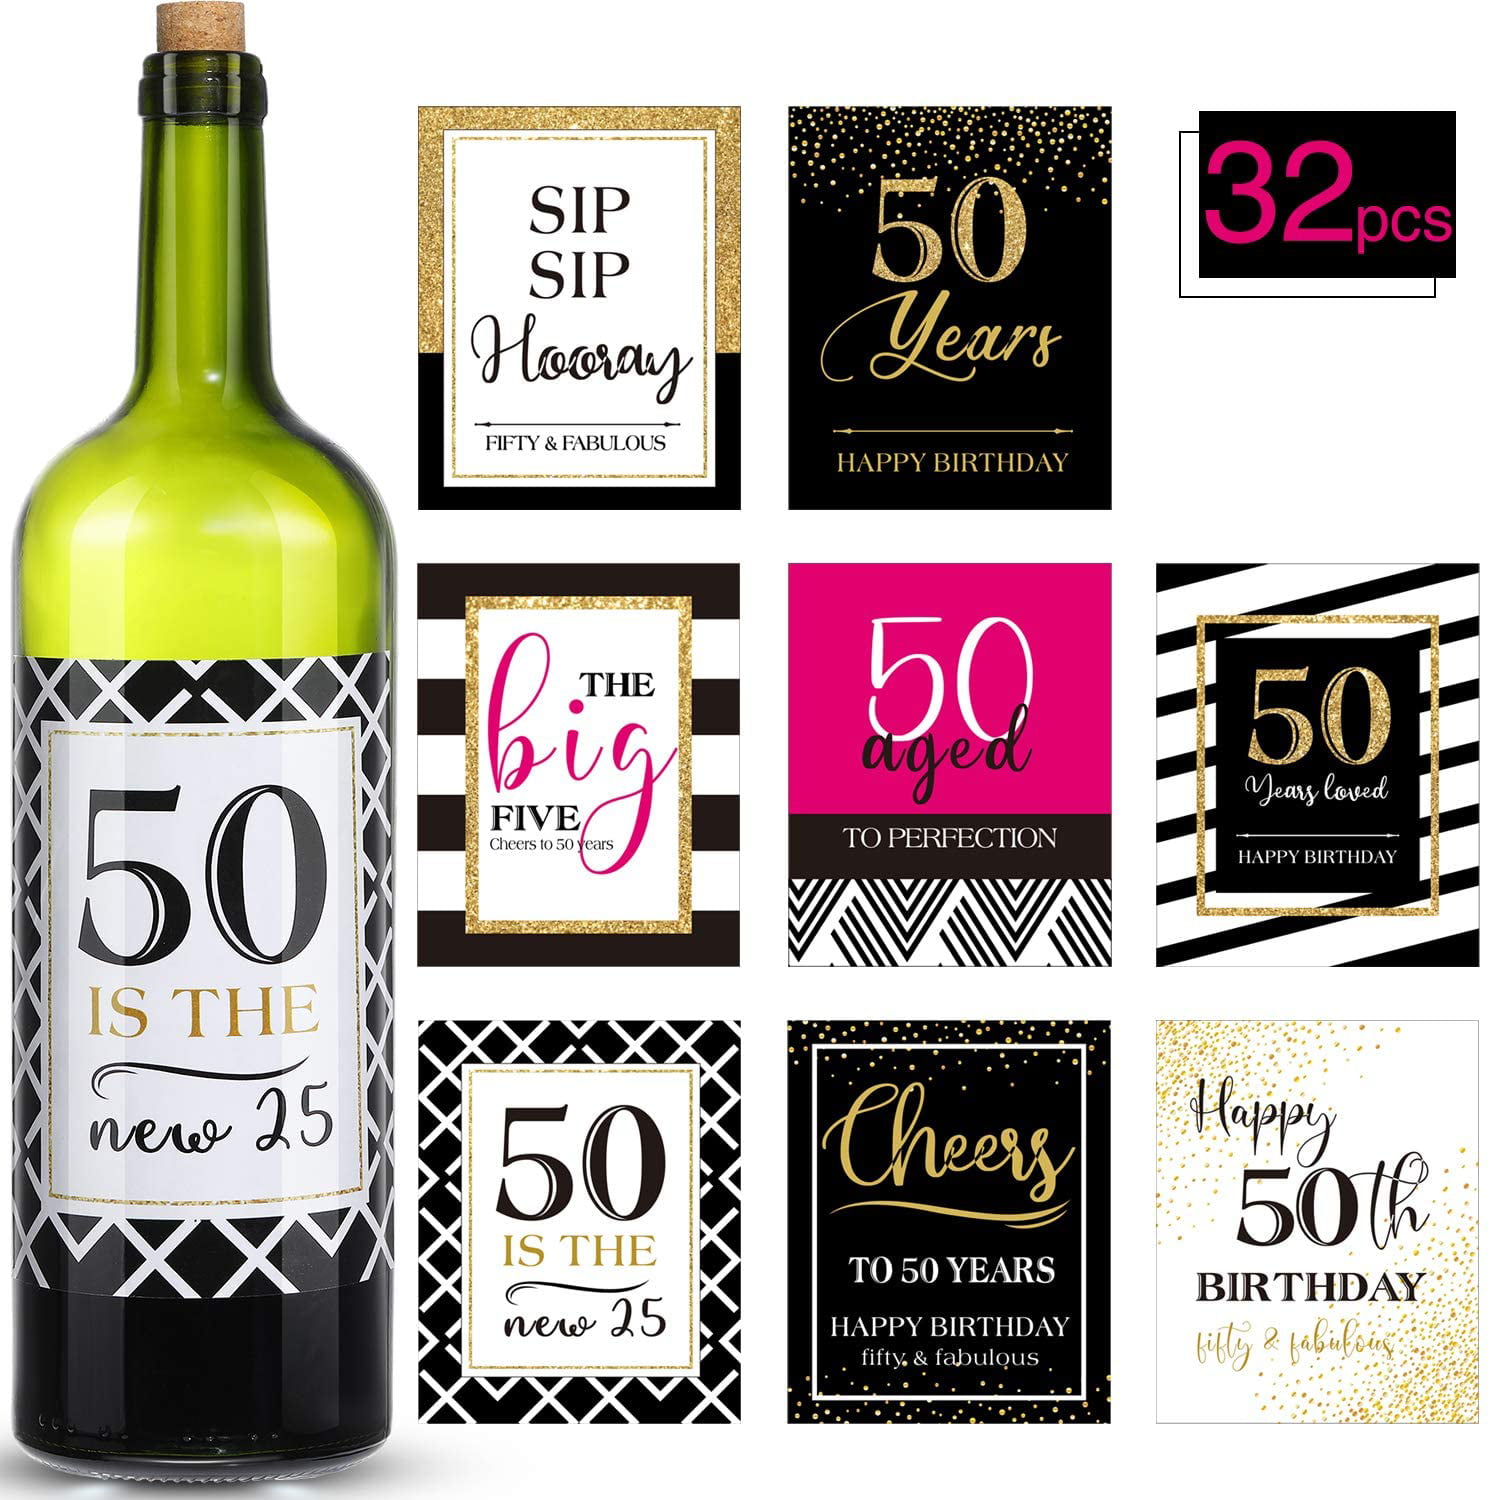 50 AND FABULOUS & FIFTY 50TH BIRTHDAY PARTY FAVORS WATER BOTTLE WRAPPERS LABELS 